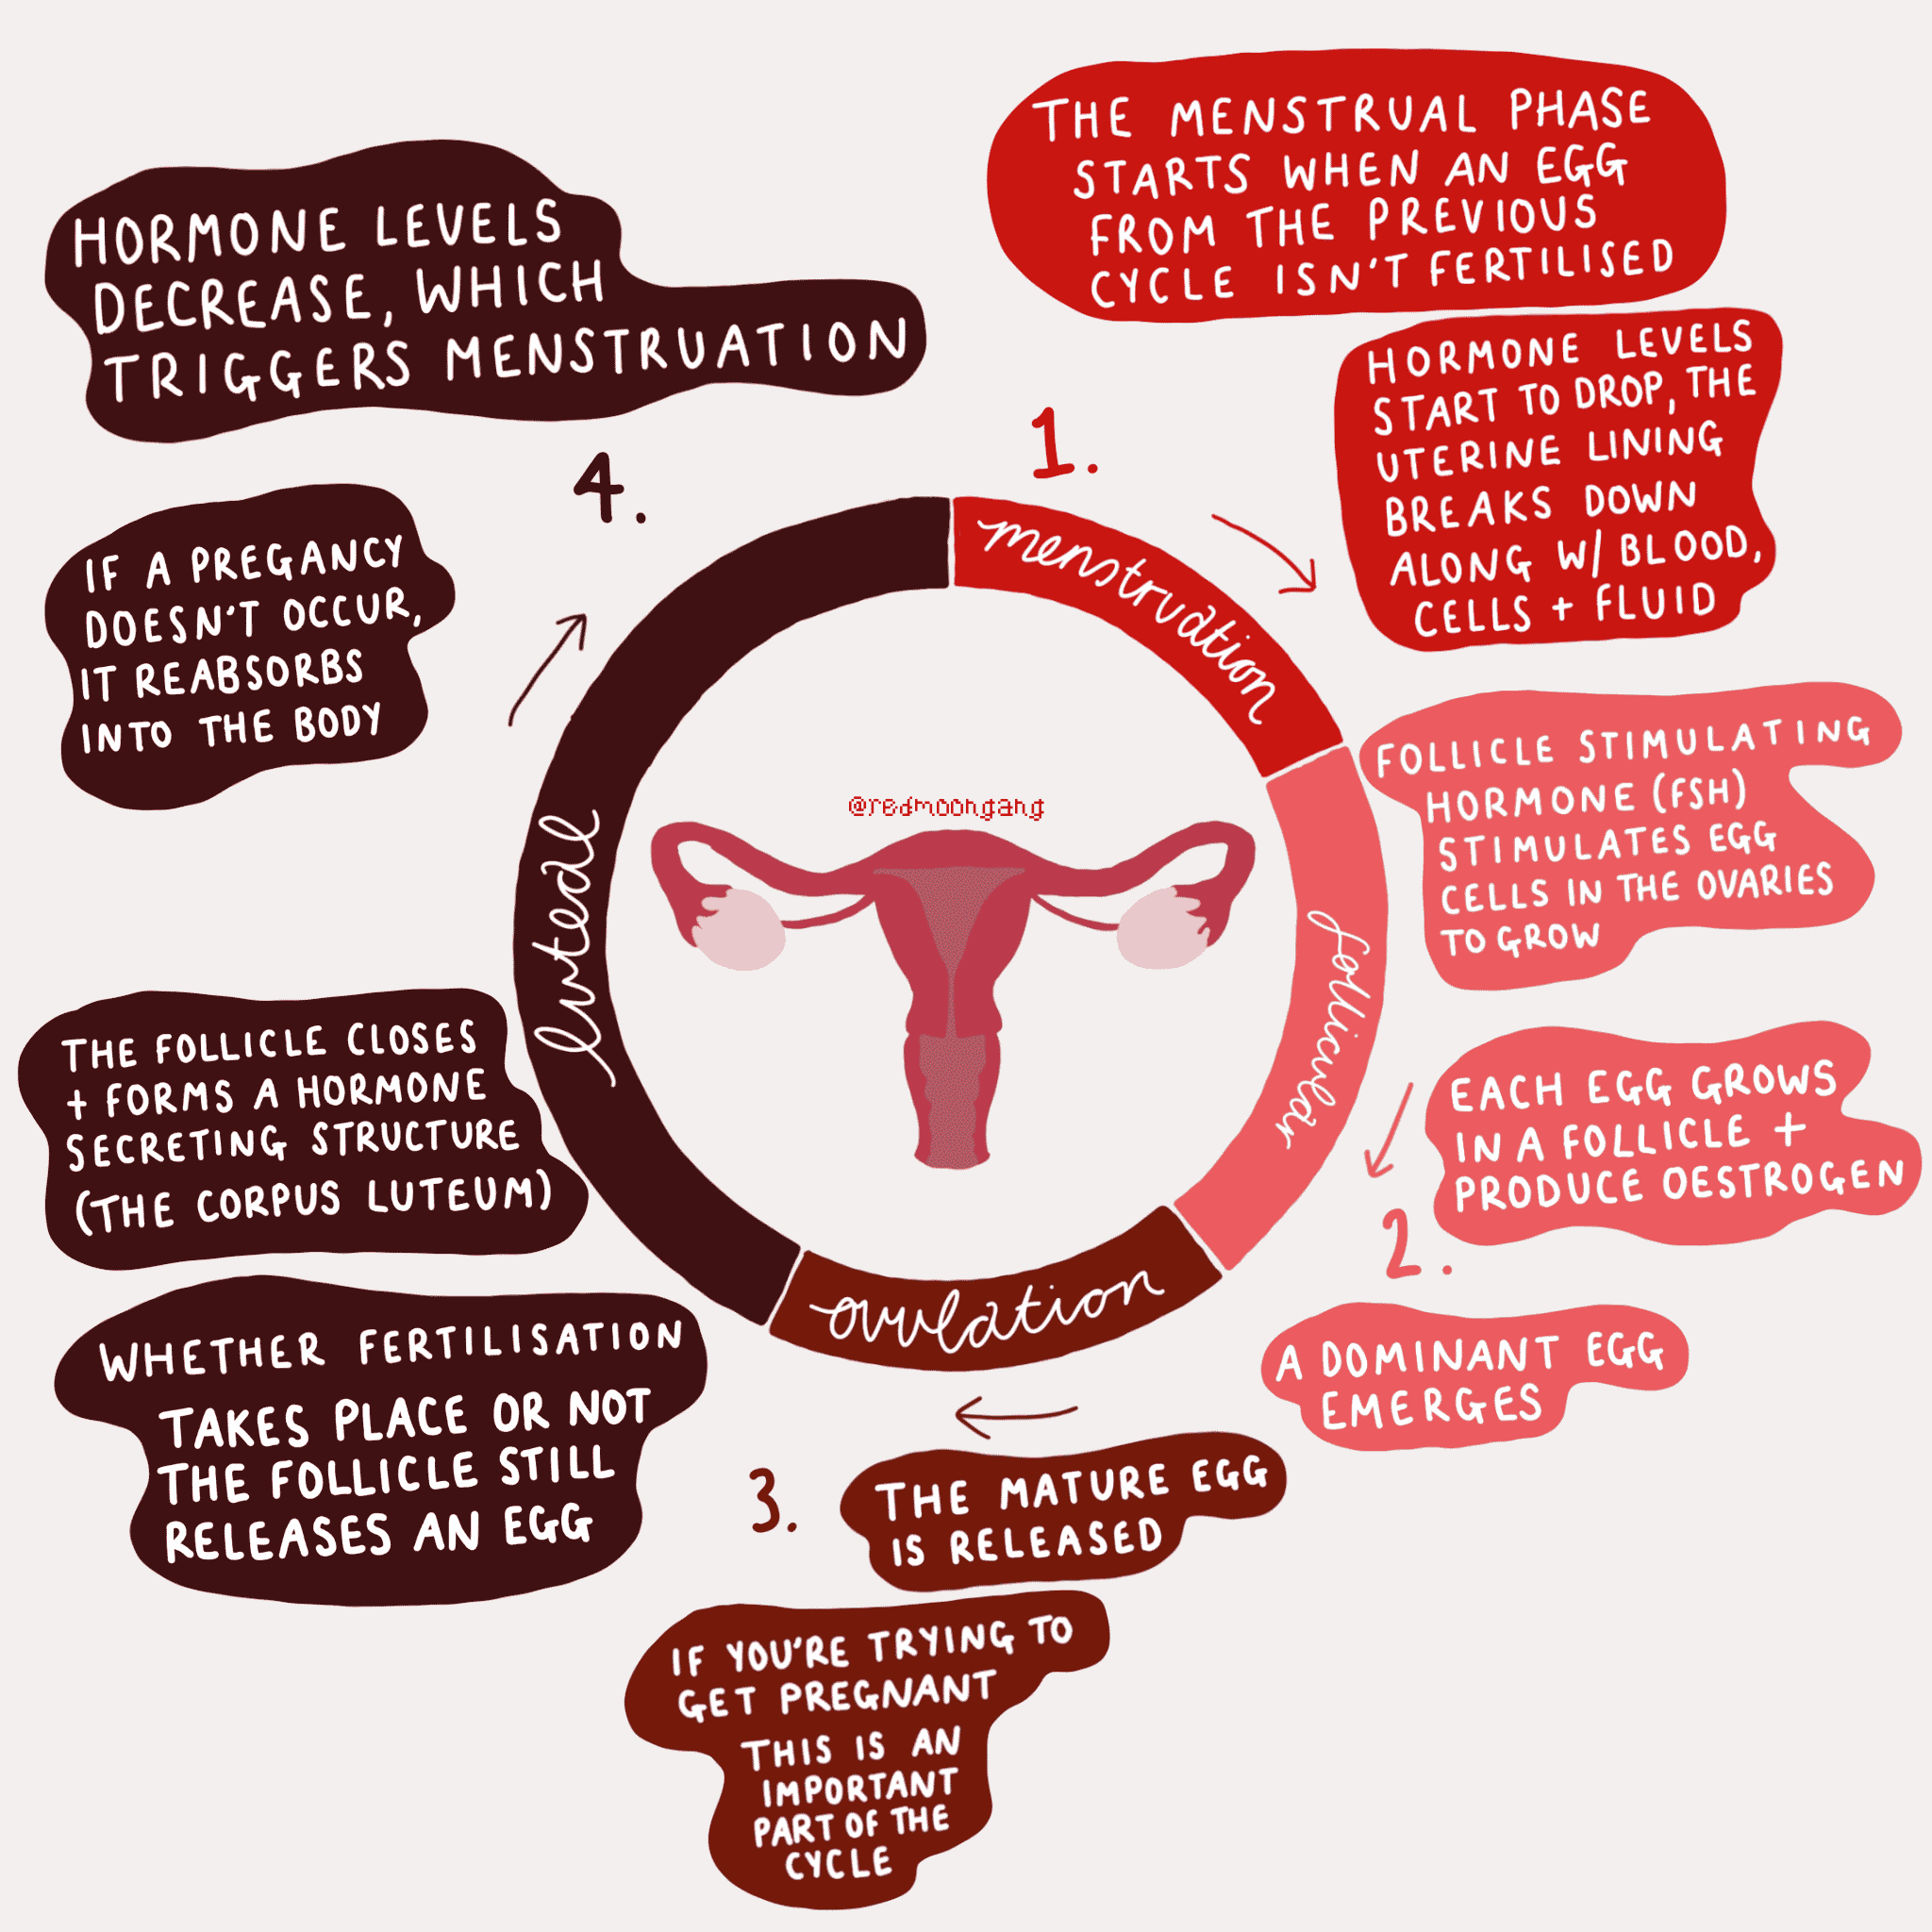 What is a menstrual cycle?